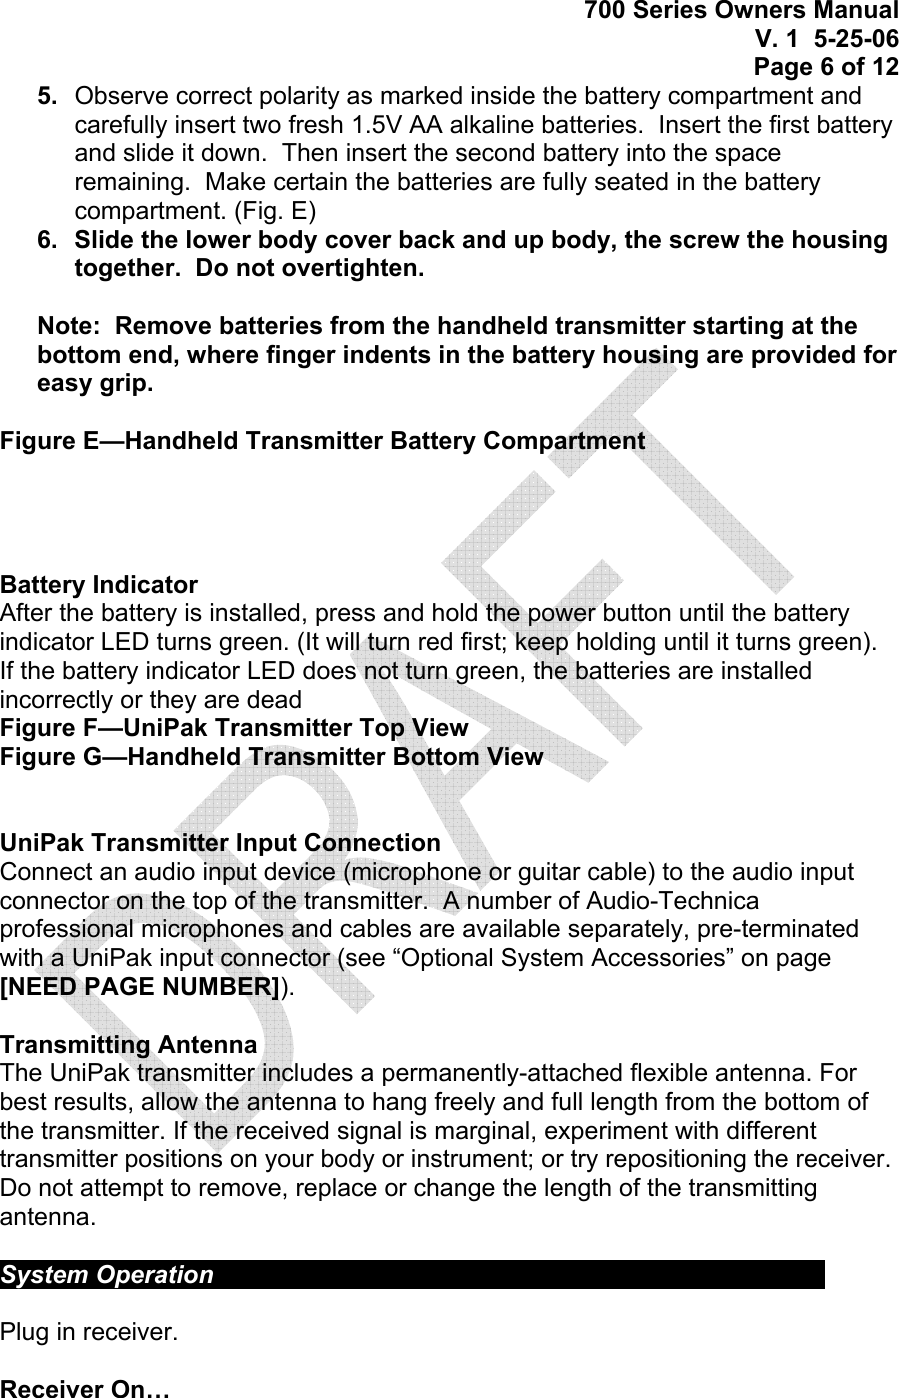 700 Series Owners Manual V. 1  5-25-06 Page 6 of 12 5.  Observe correct polarity as marked inside the battery compartment and carefully insert two fresh 1.5V AA alkaline batteries.  Insert the first battery and slide it down.  Then insert the second battery into the space remaining.  Make certain the batteries are fully seated in the battery compartment. (Fig. E) 6.  Slide the lower body cover back and up body, the screw the housing together.  Do not overtighten.  Note:  Remove batteries from the handheld transmitter starting at the bottom end, where finger indents in the battery housing are provided for easy grip.  Figure E—Handheld Transmitter Battery Compartment     Battery Indicator After the battery is installed, press and hold the power button until the battery indicator LED turns green. (It will turn red first; keep holding until it turns green).  If the battery indicator LED does not turn green, the batteries are installed incorrectly or they are dead Figure F—UniPak Transmitter Top View Figure G—Handheld Transmitter Bottom View   UniPak Transmitter Input Connection Connect an audio input device (microphone or guitar cable) to the audio input connector on the top of the transmitter.  A number of Audio-Technica professional microphones and cables are available separately, pre-terminated with a UniPak input connector (see “Optional System Accessories” on page [NEED PAGE NUMBER]).  Transmitting Antenna The UniPak transmitter includes a permanently-attached flexible antenna. For best results, allow the antenna to hang freely and full length from the bottom of the transmitter. If the received signal is marginal, experiment with different transmitter positions on your body or instrument; or try repositioning the receiver. Do not attempt to remove, replace or change the length of the transmitting antenna.  System Operation             Plug in receiver.  Receiver On… 